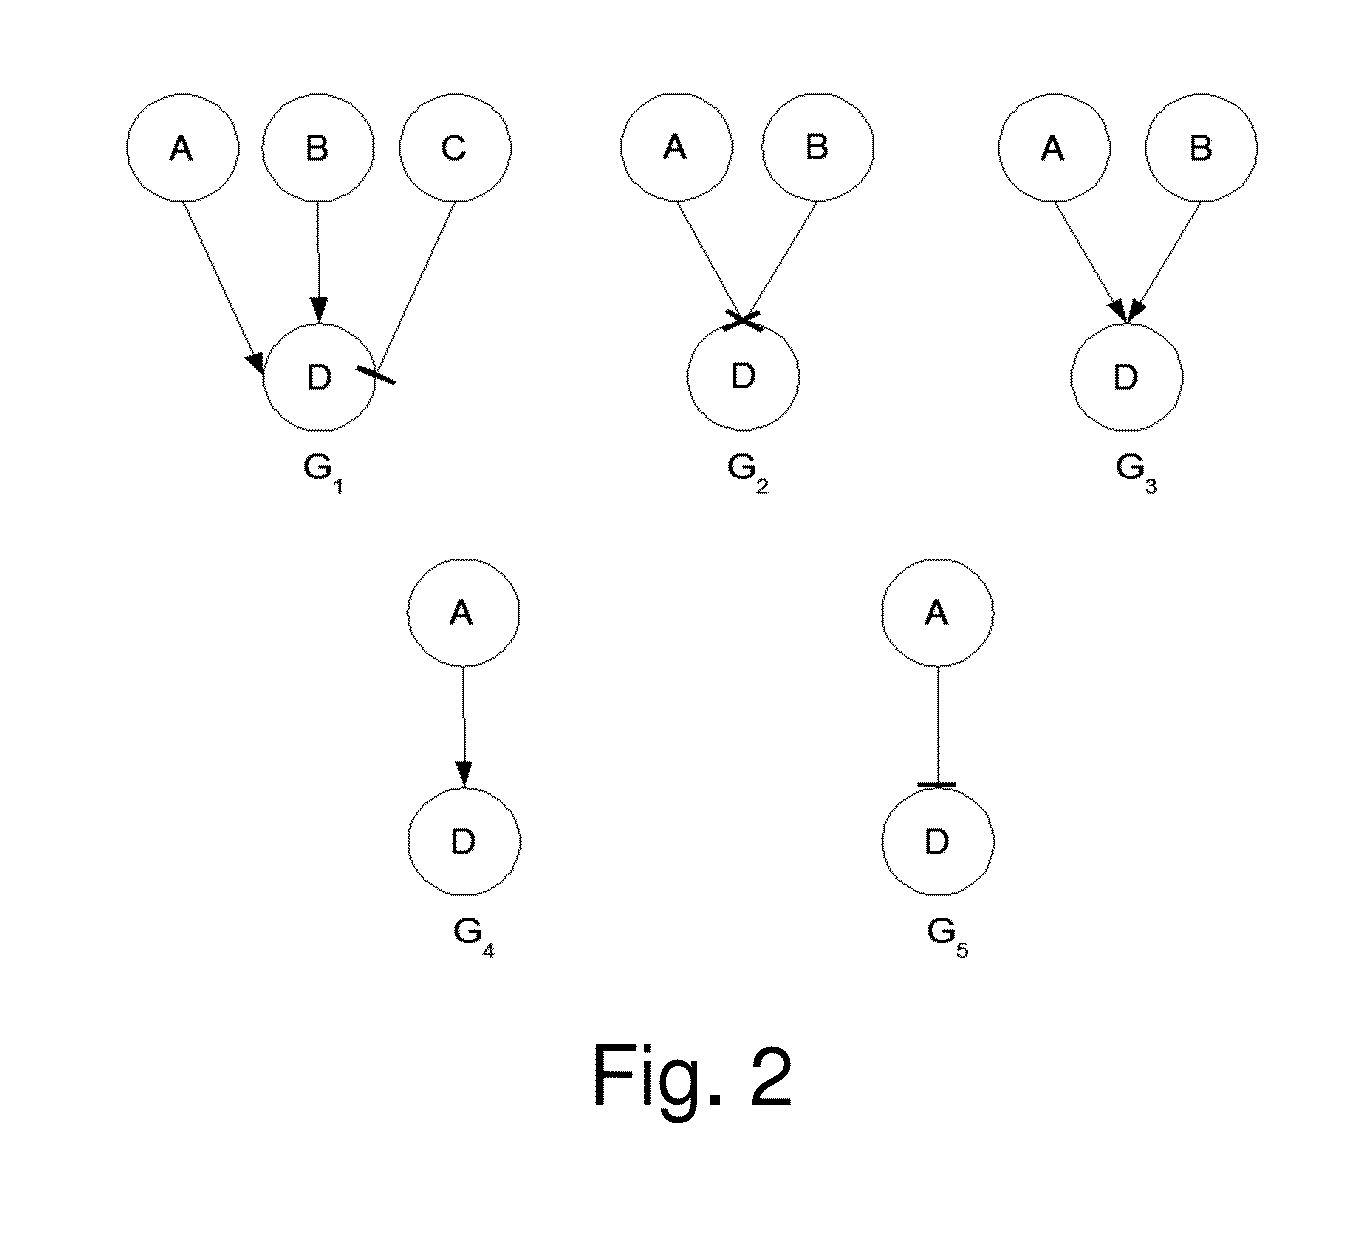 Systems and Methods for Identifying Drug Targets Using Biological Networks